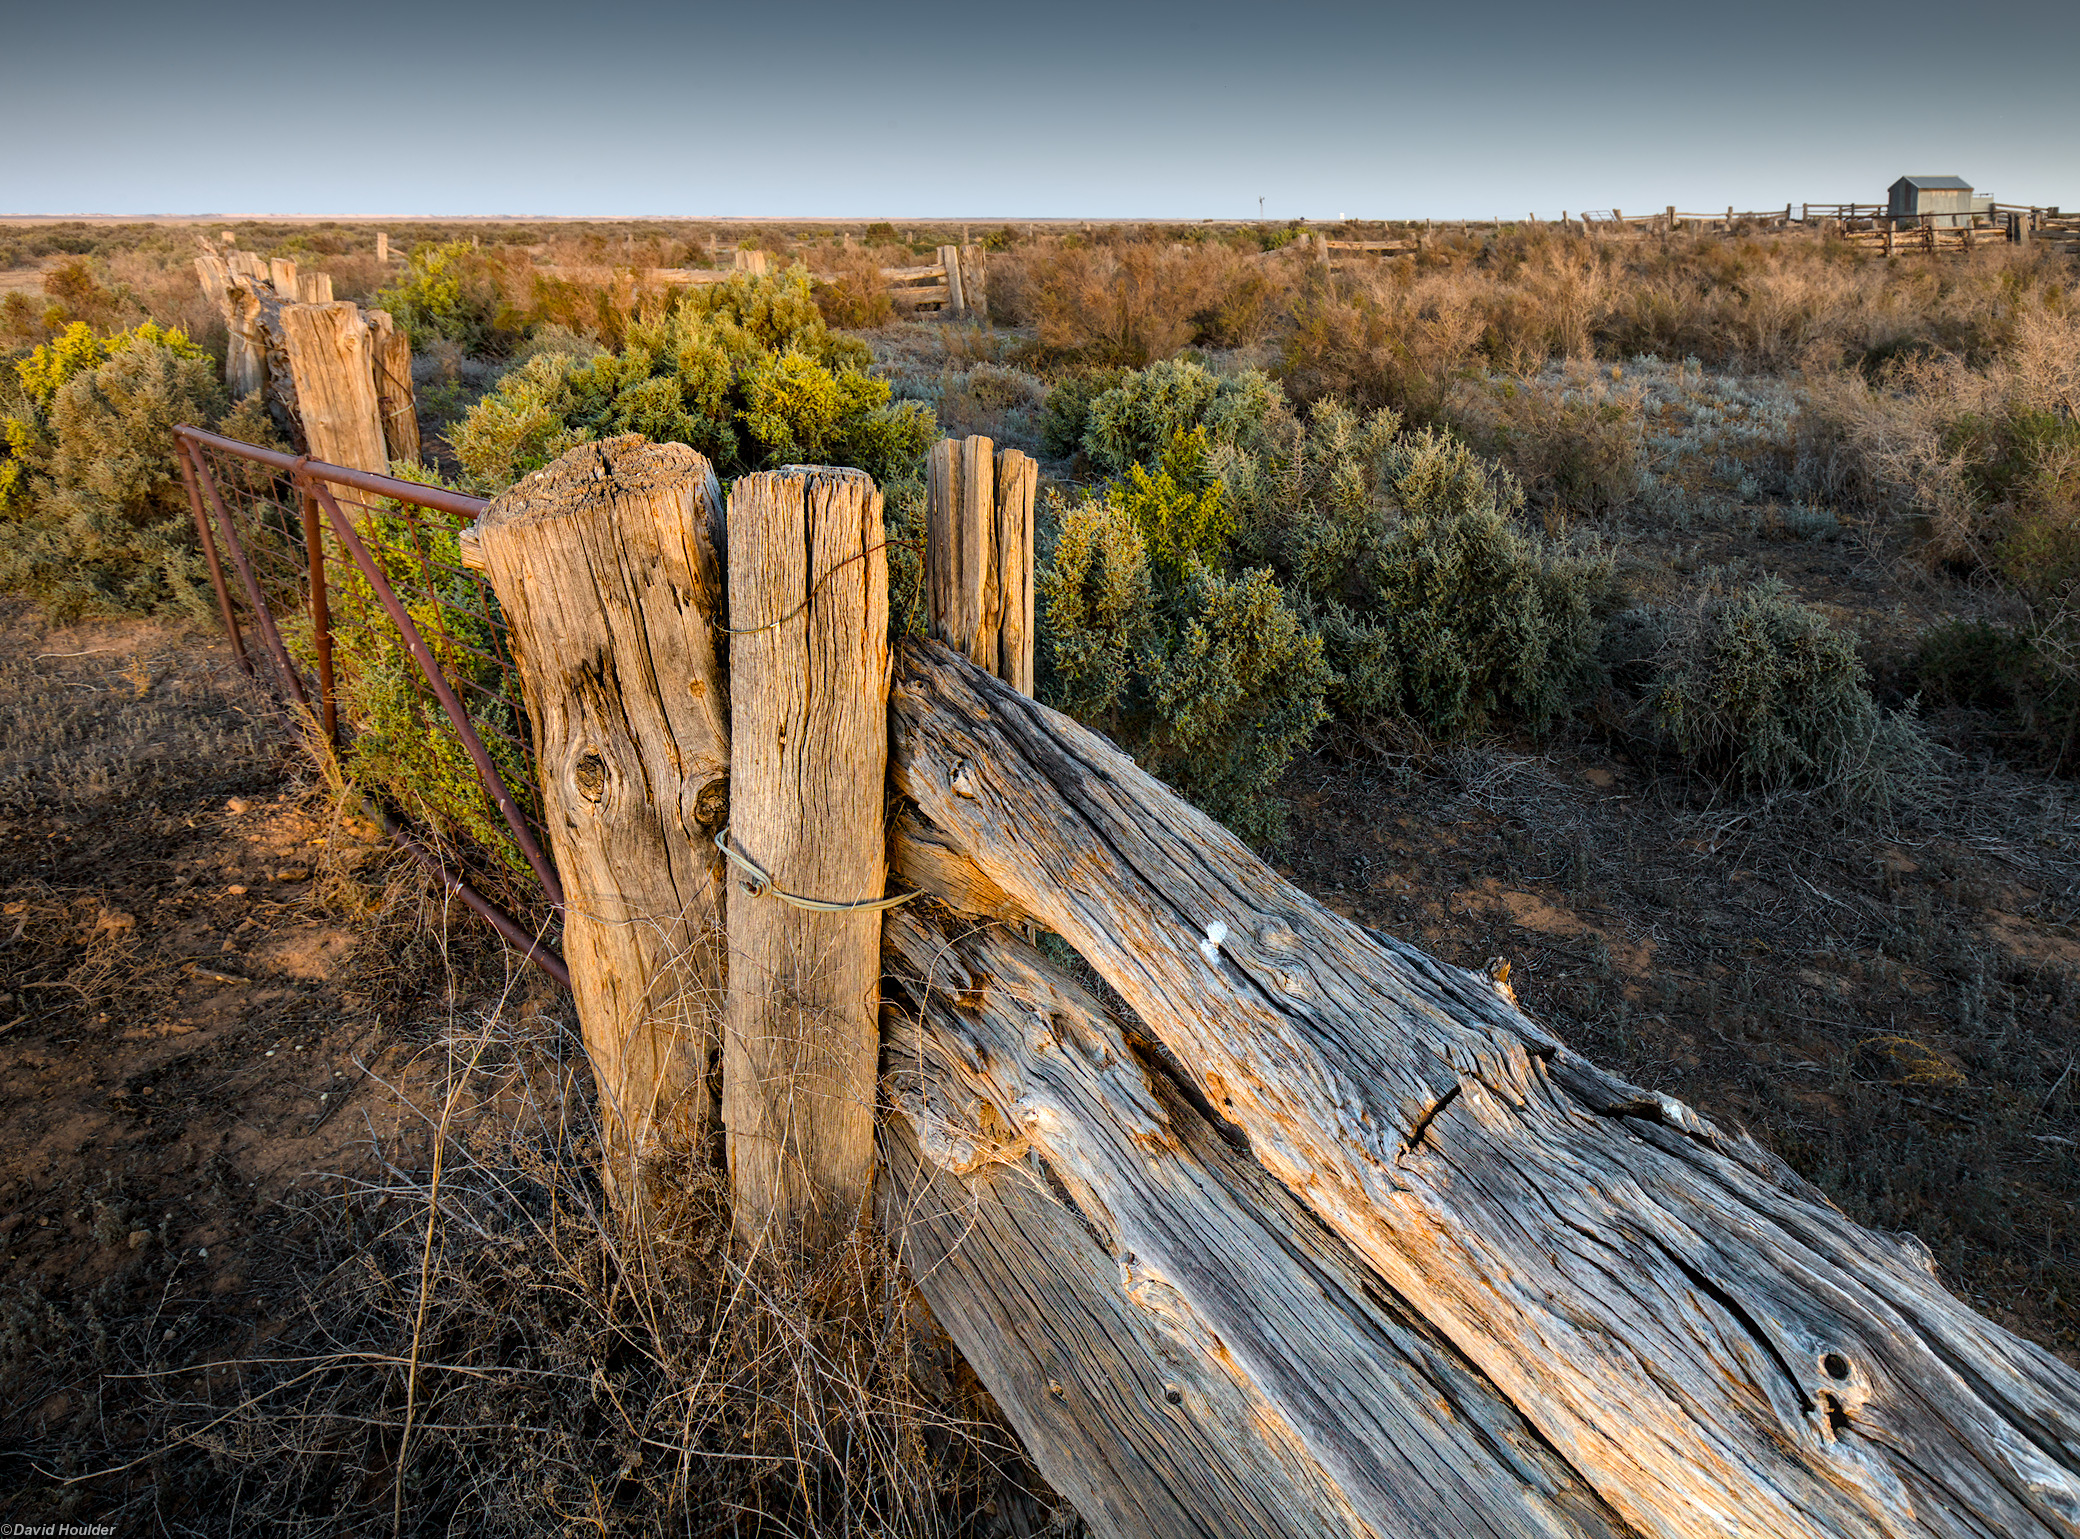 Weathered wooden fence, rusted gate, shrubs and distant shed